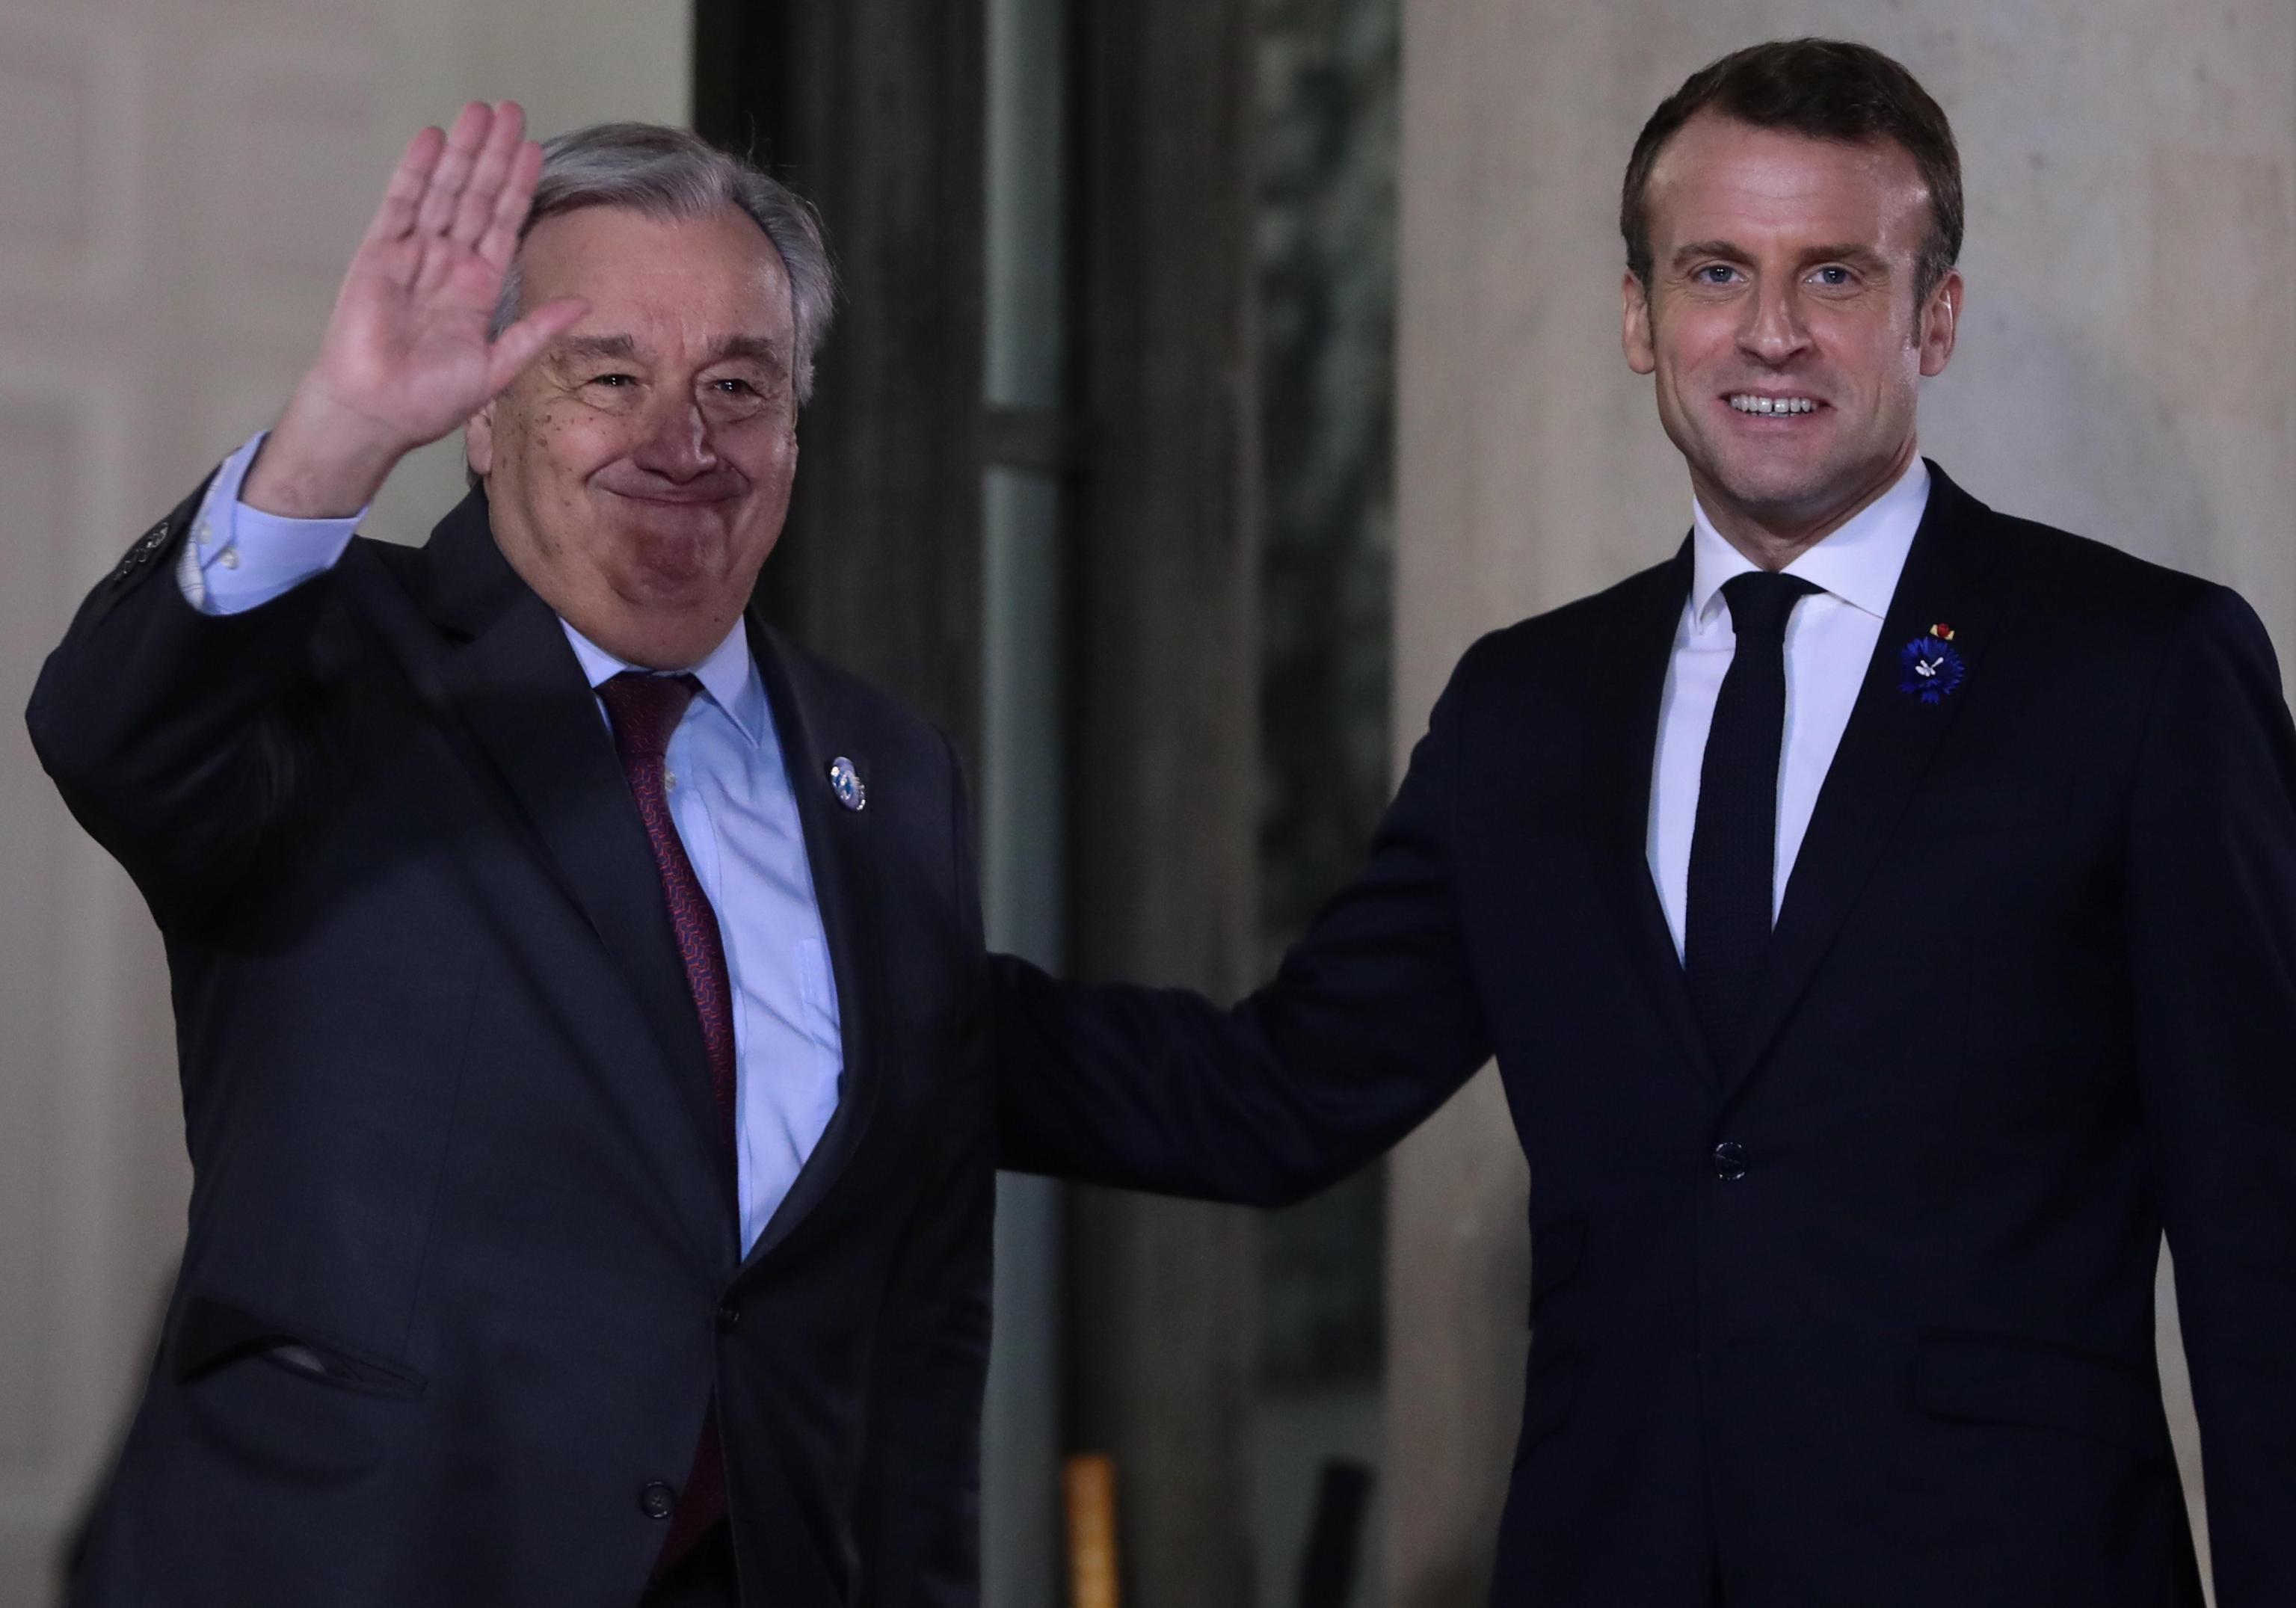 epa07989128 President Emmanuel Macron (R) greets UN Secretary-General Antonio Guterres (L) for a dinner with participants of the Paris Peace Forum, at the Elysee Palace, in Paris, France, 11 November 2019.  EPA/CHRISTOPHE PETIT TESSON